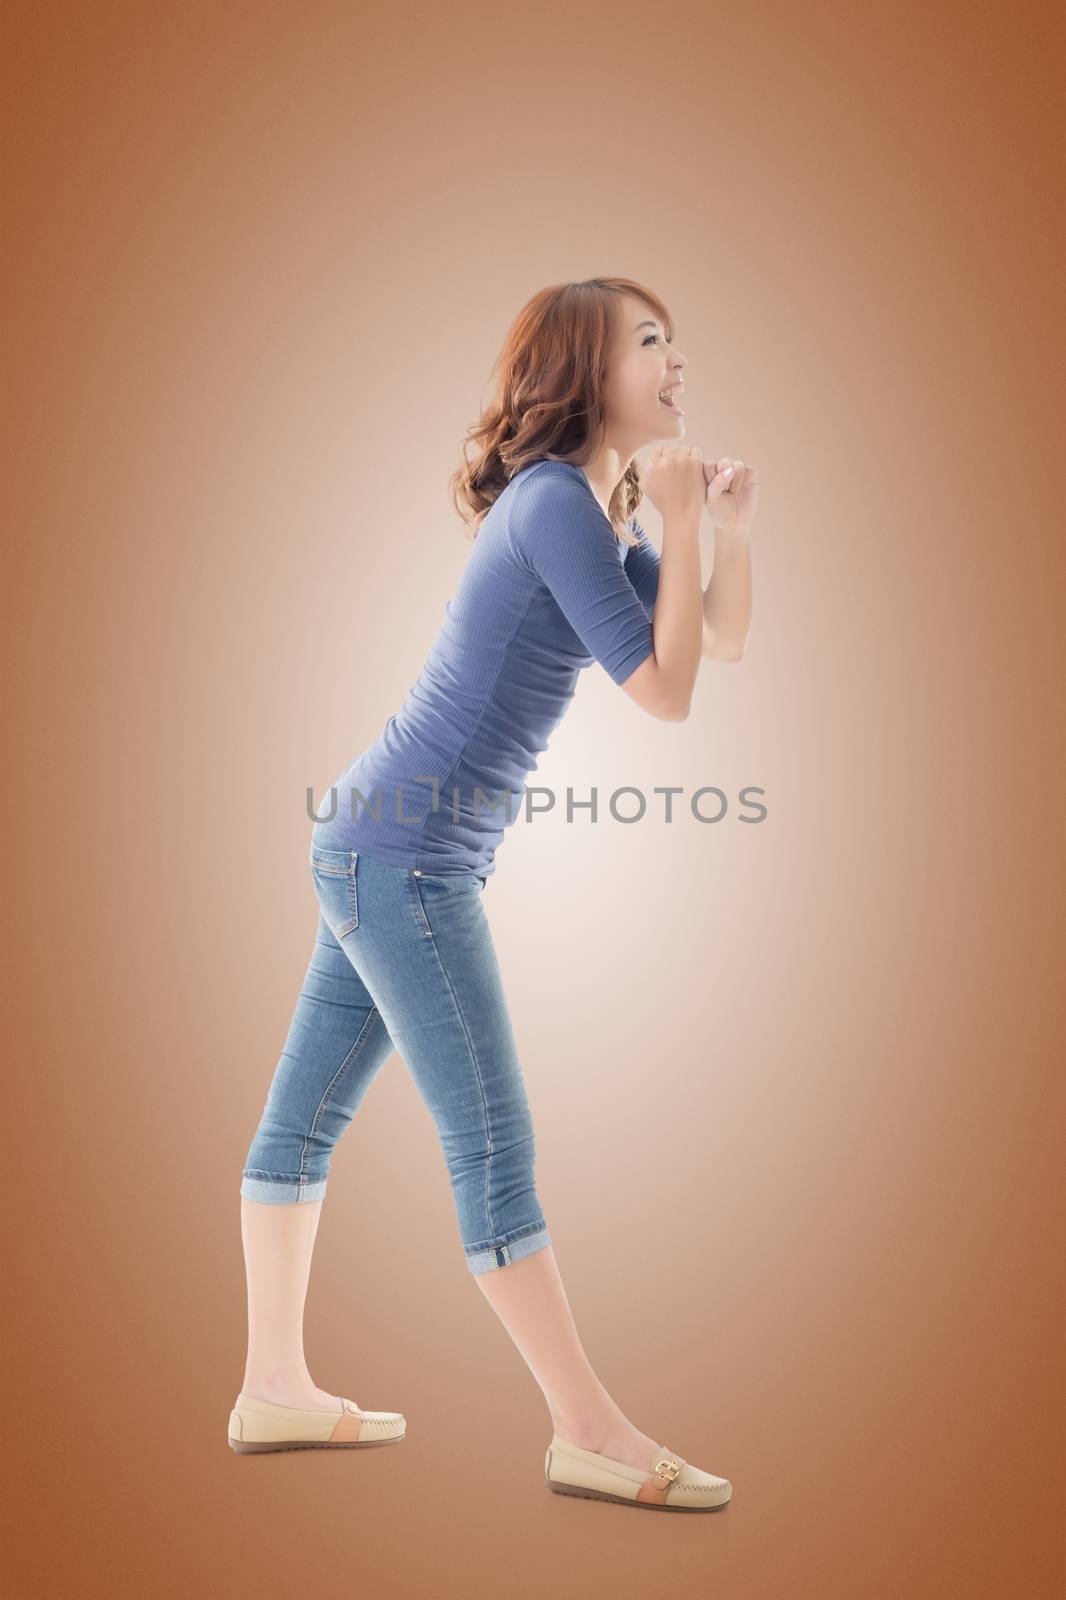 Pull pose, full length portrait of Asian isolated.